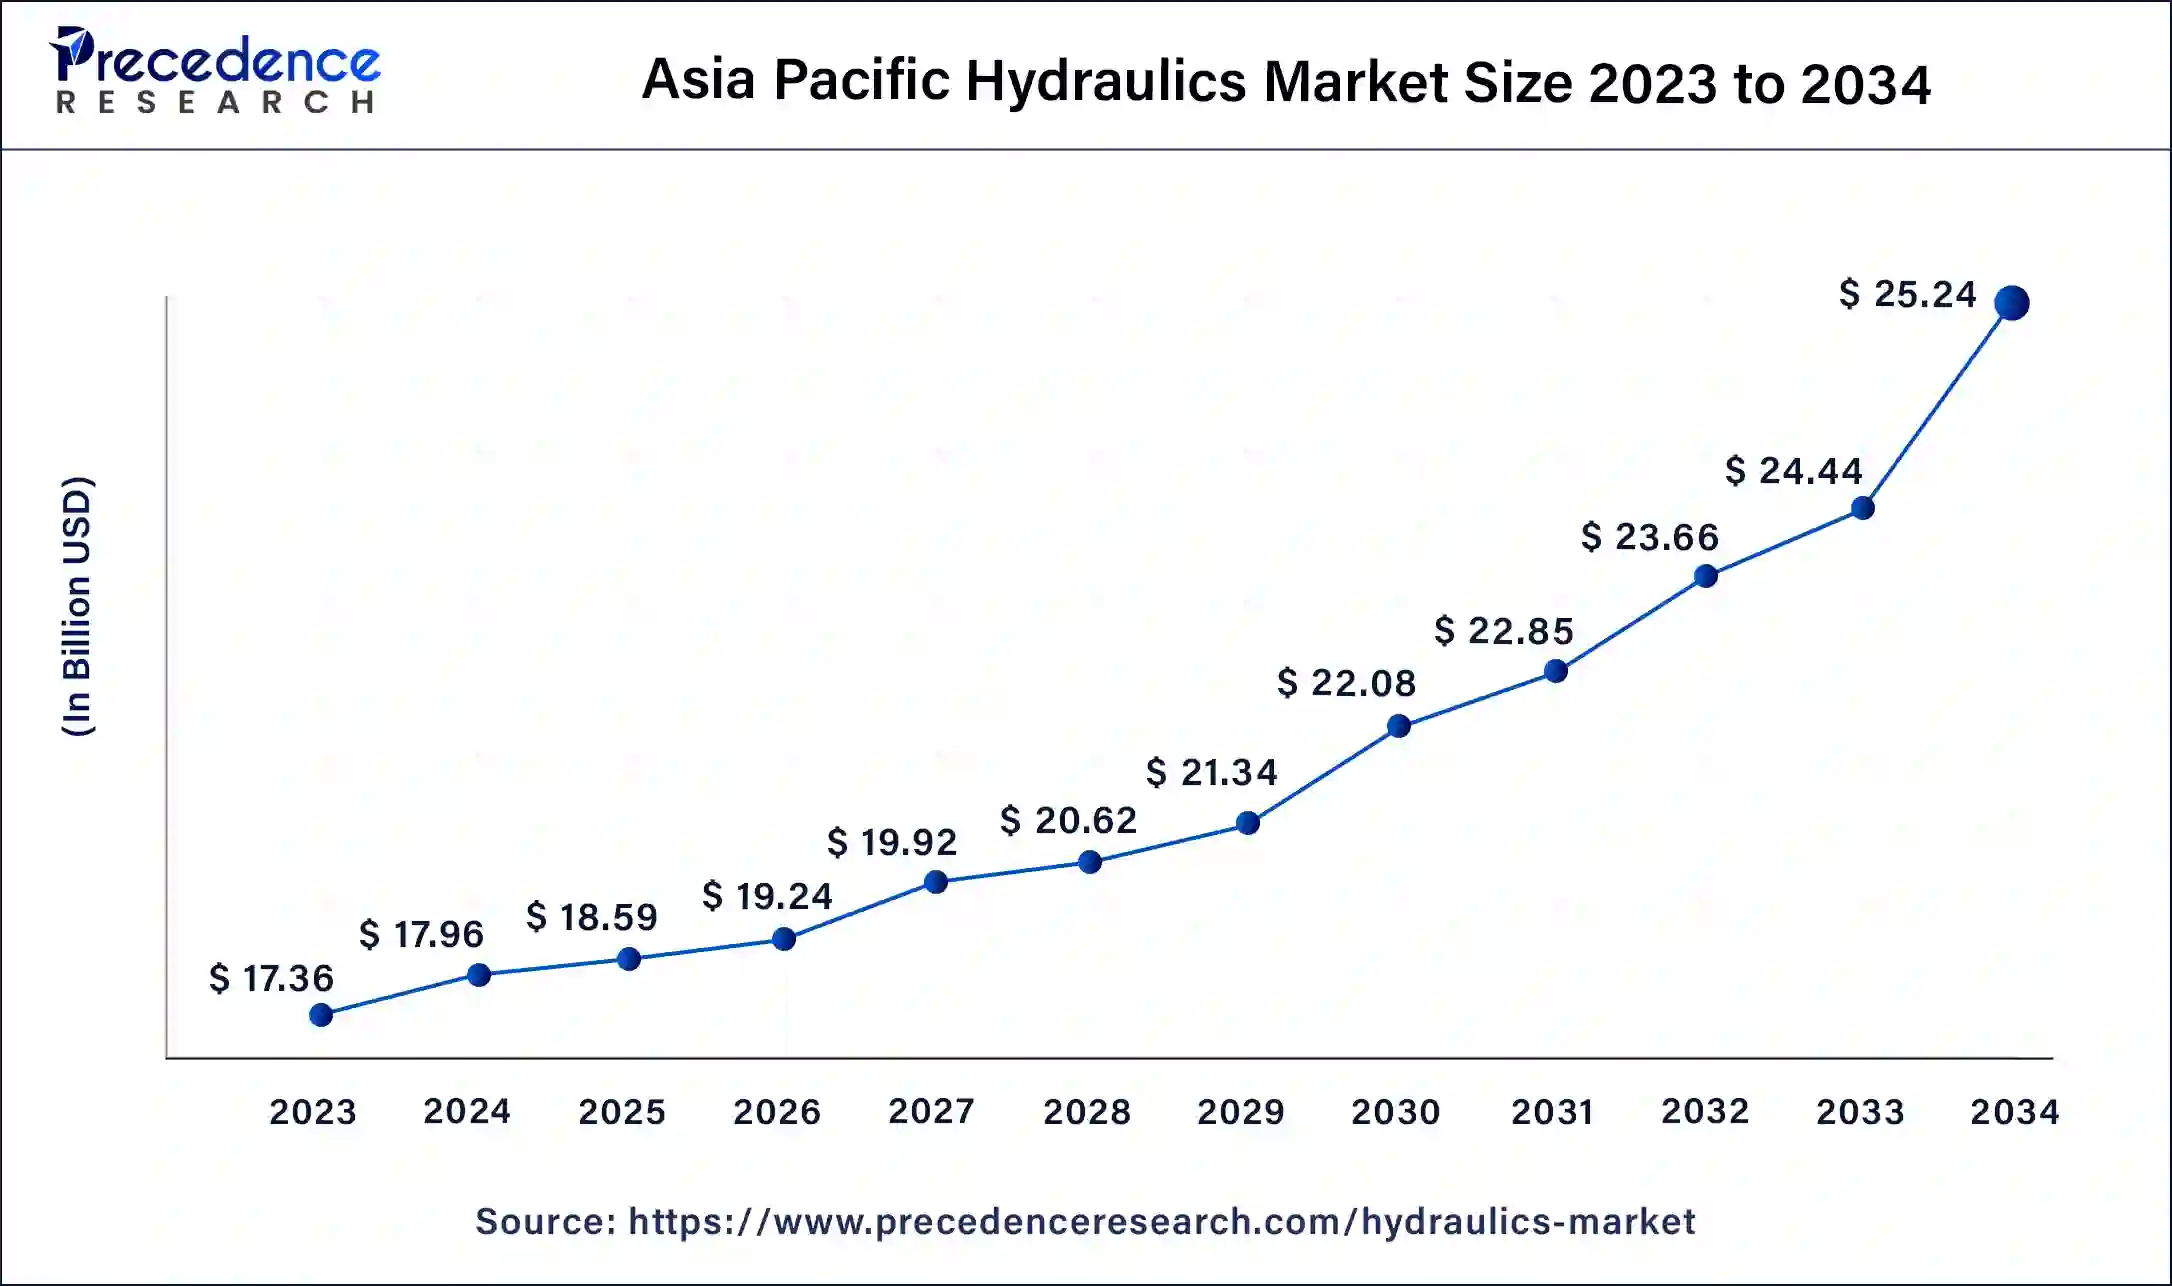 Asia Pacific Hydraulics Market Size 2024 To 2034